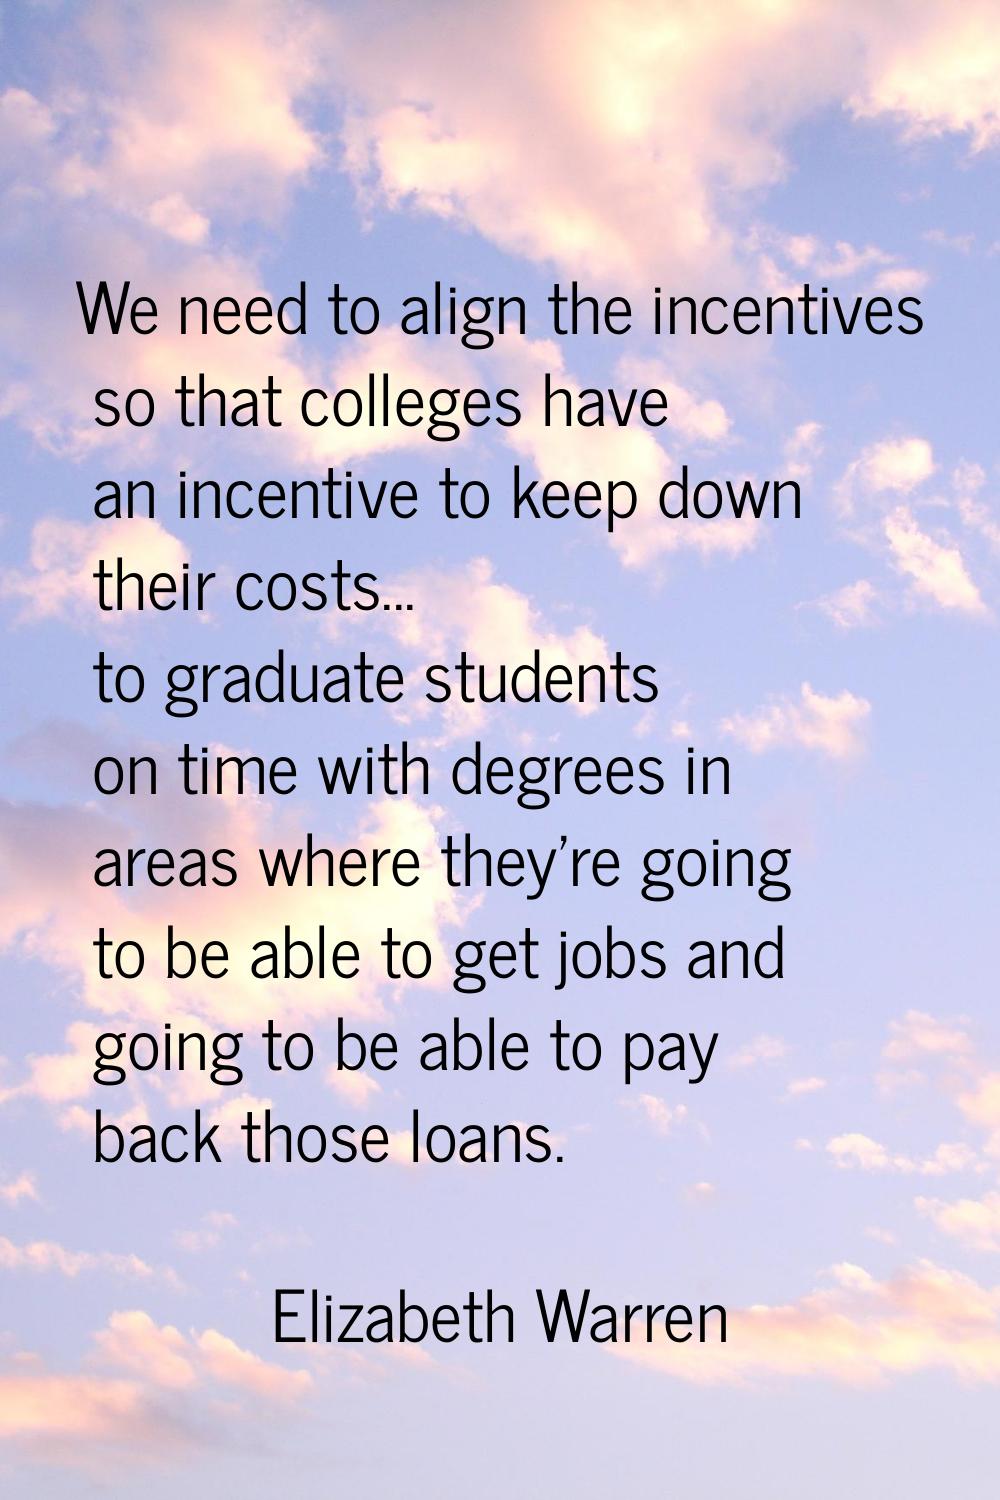 We need to align the incentives so that colleges have an incentive to keep down their costs... to g